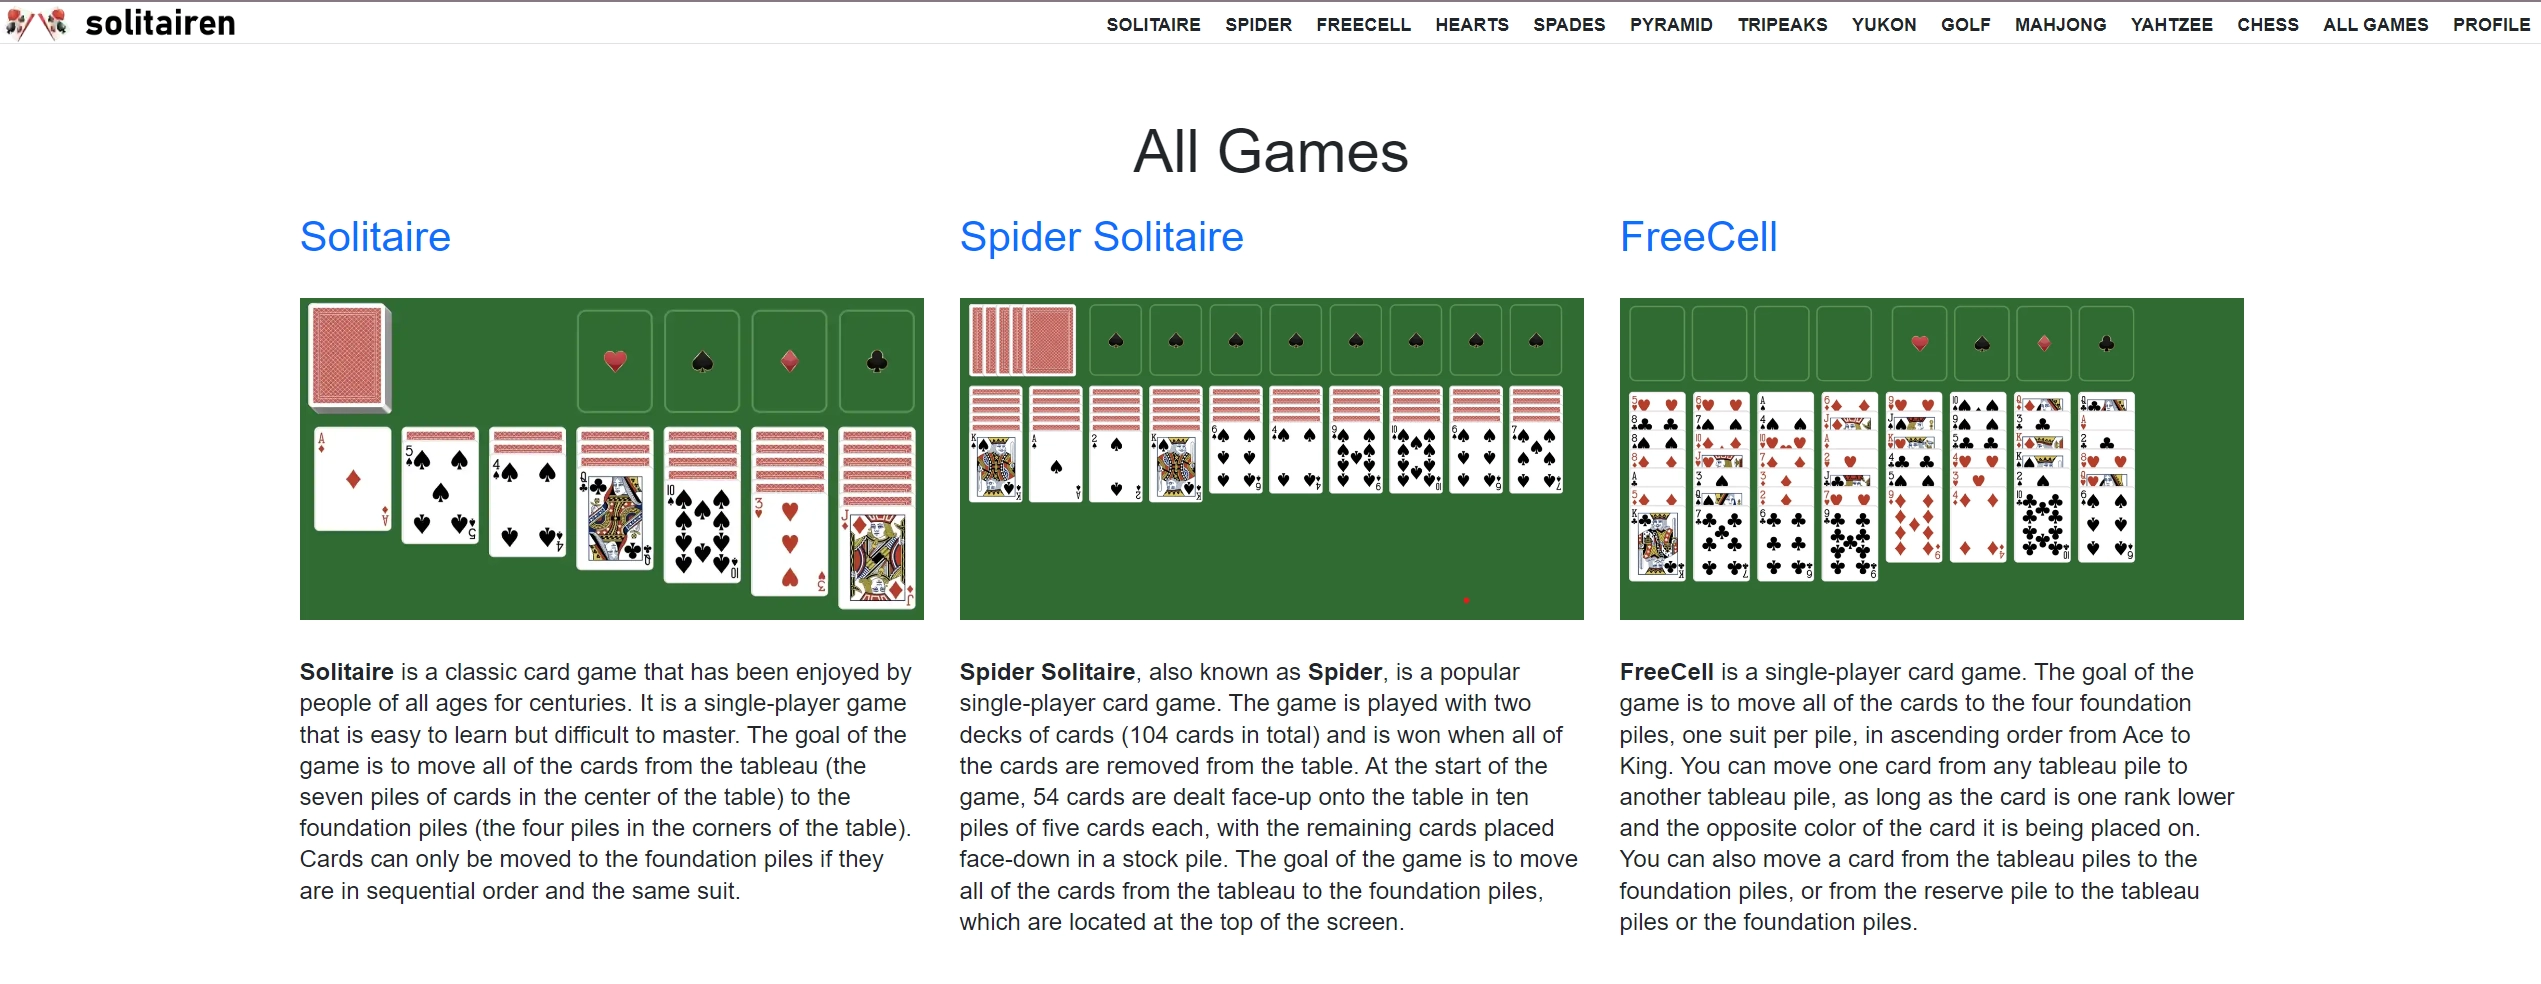 How digital world affected solitaire game through the years